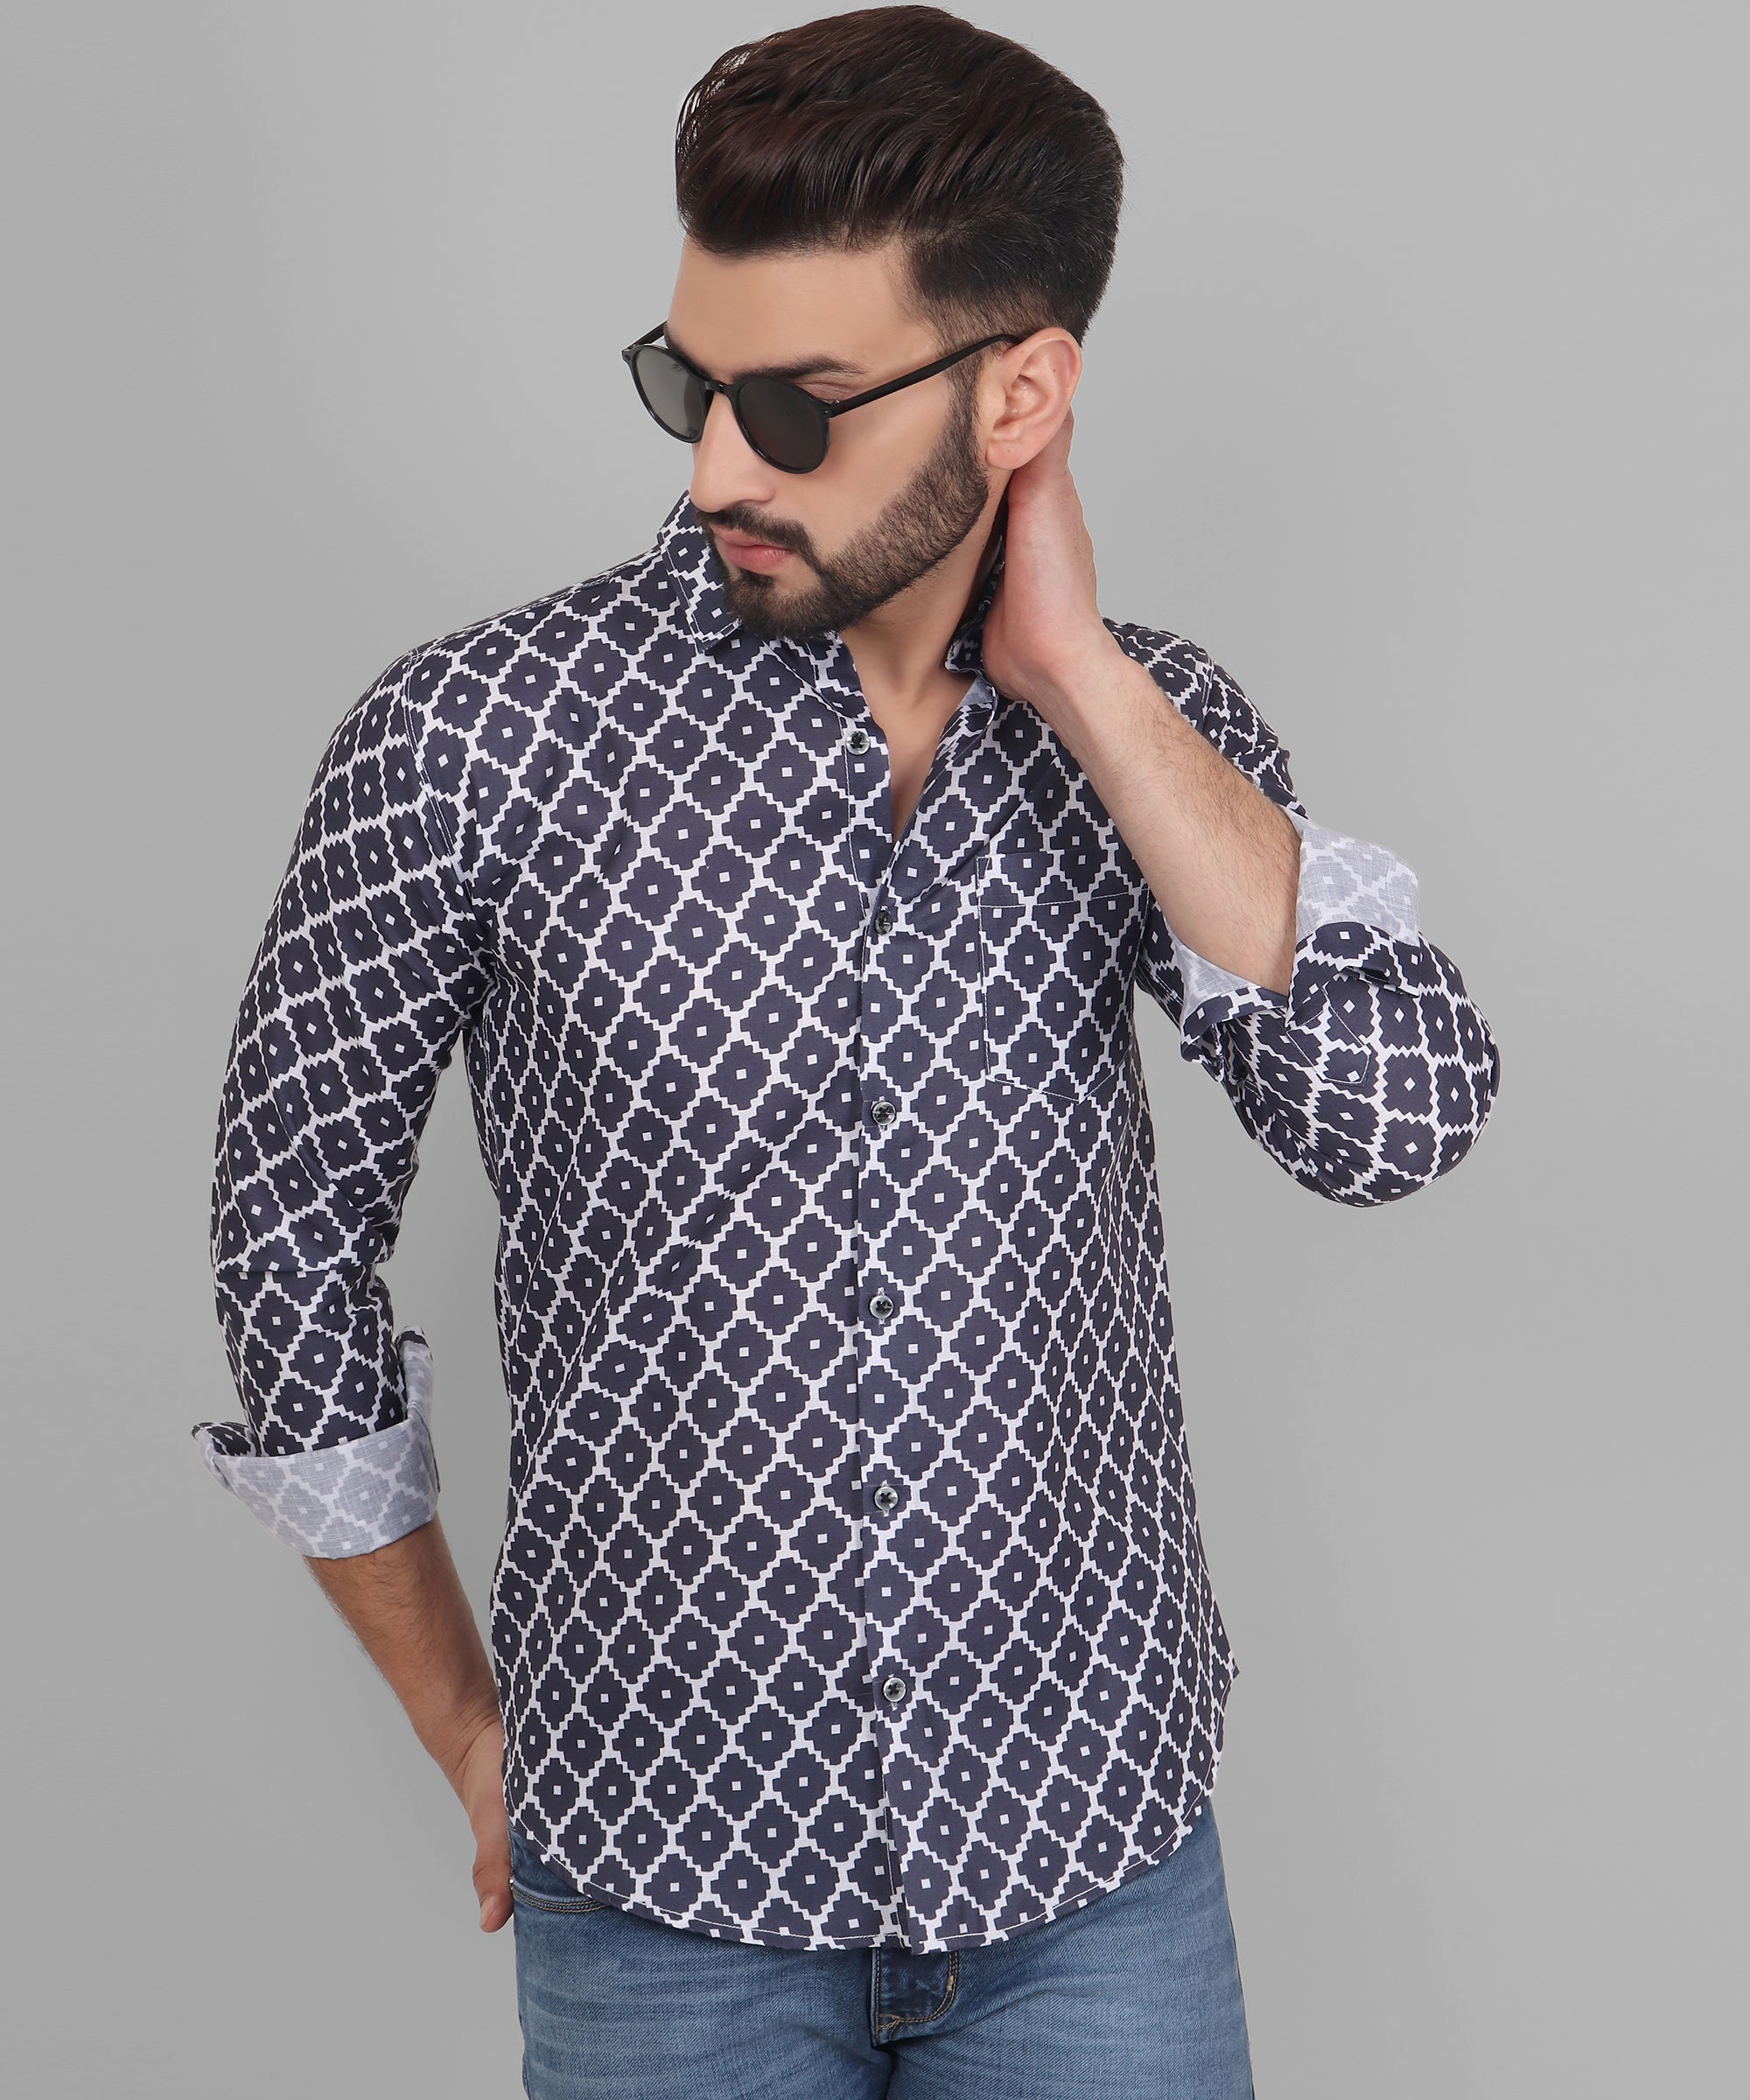 How do Oxford cotton shirts fare in terms of colorfastness?